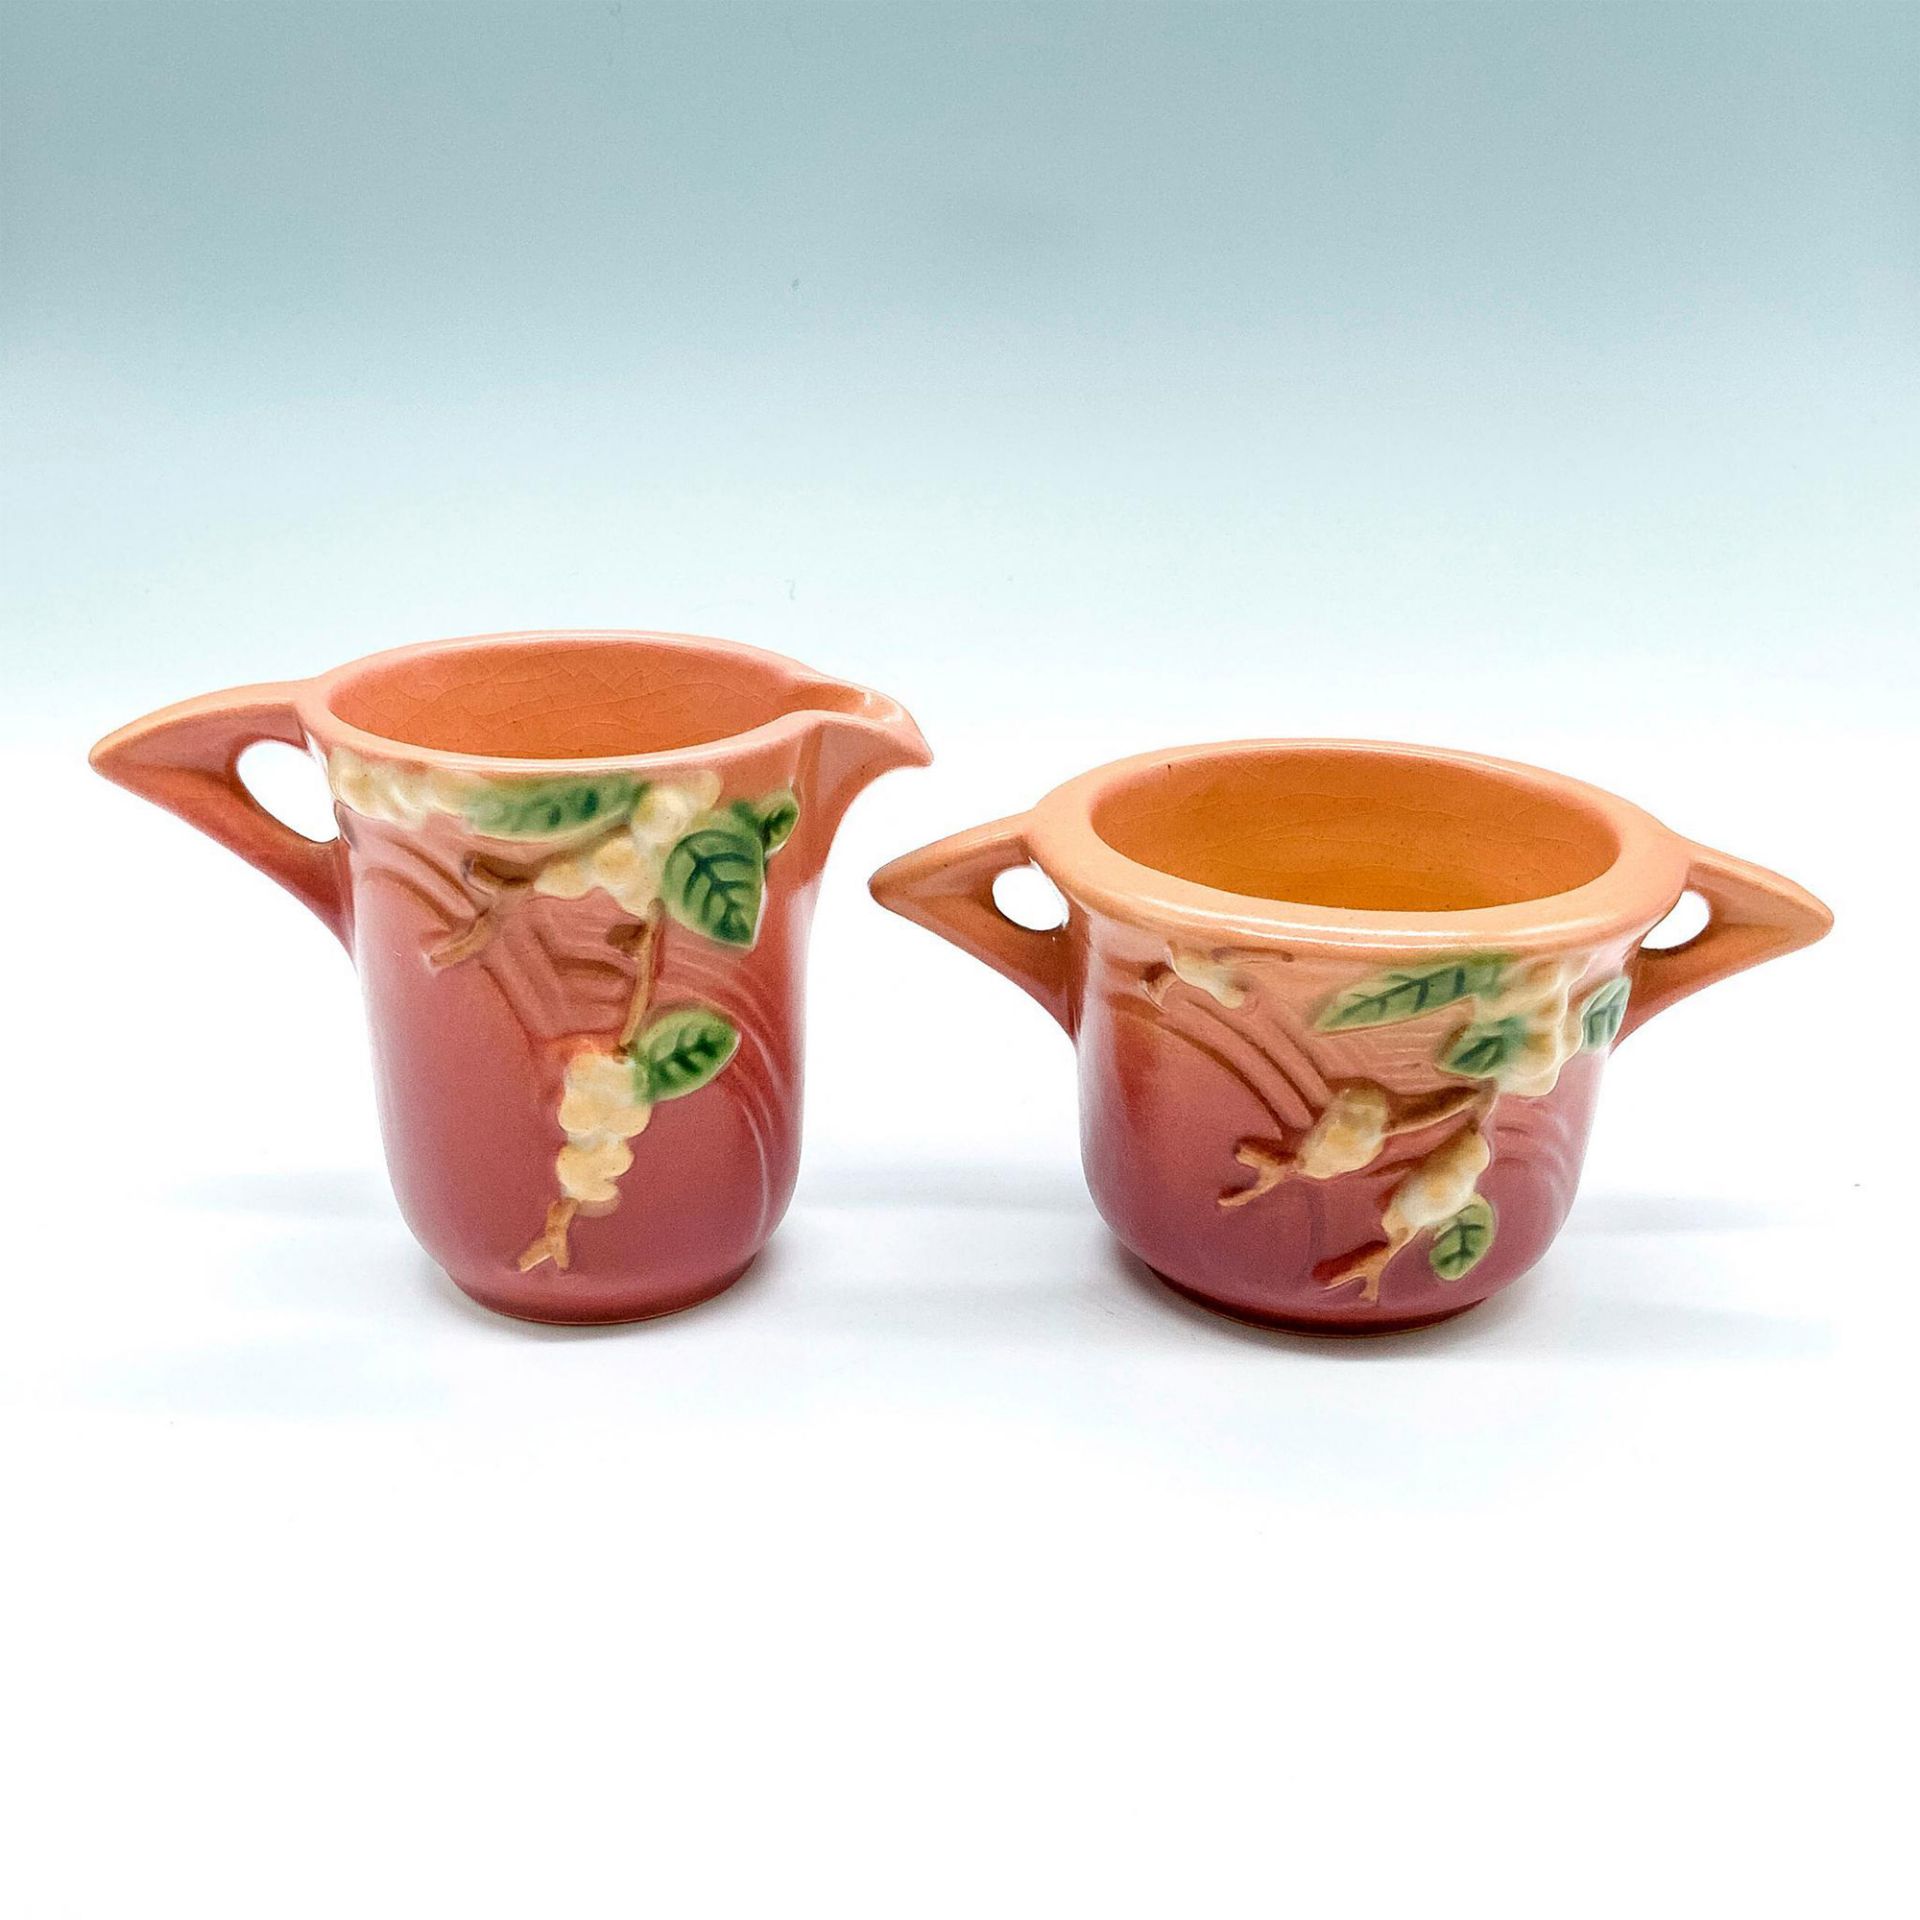 2pc Roseville Pink Snowberry Sugar Bowl and Creamer - Image 3 of 5